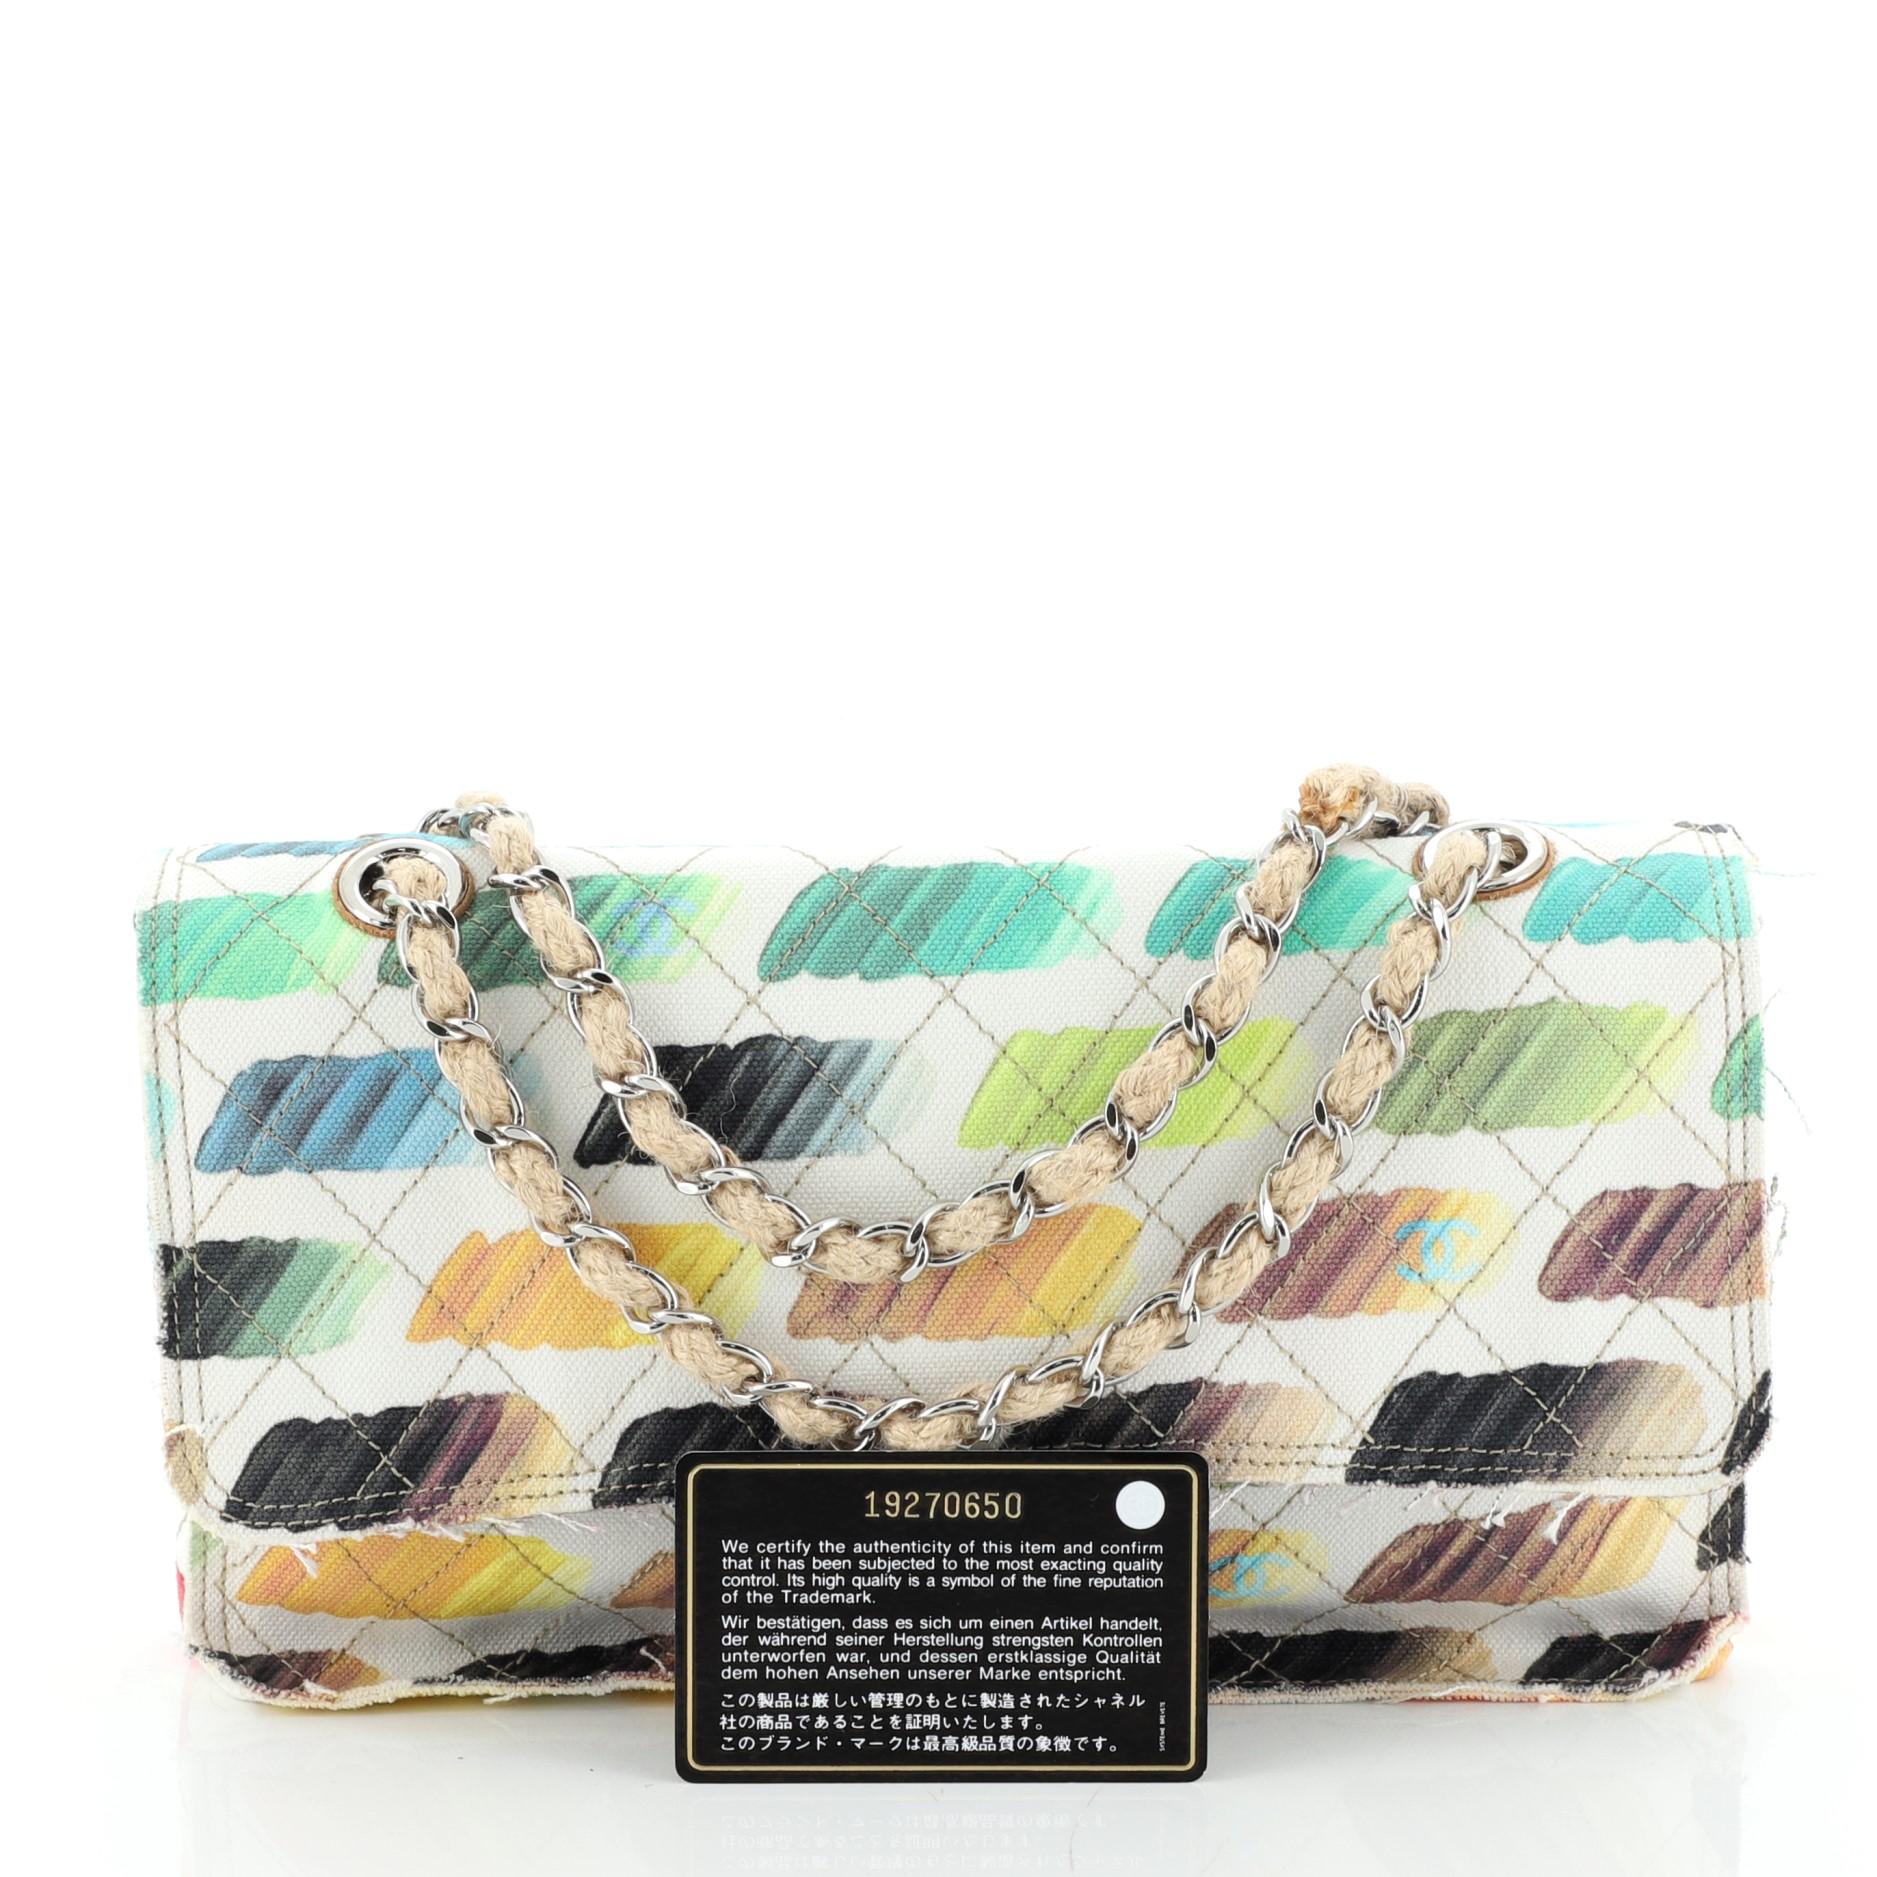 This Chanel Colorama Flap Bag Quilted Watercolor Canvas Medium, crafted in white quilted canvas, features multicolor watercolor brush strokes, exterior back pocket, woven in jute chain link straps and silver-tone hardware. Its CC turn lock closure